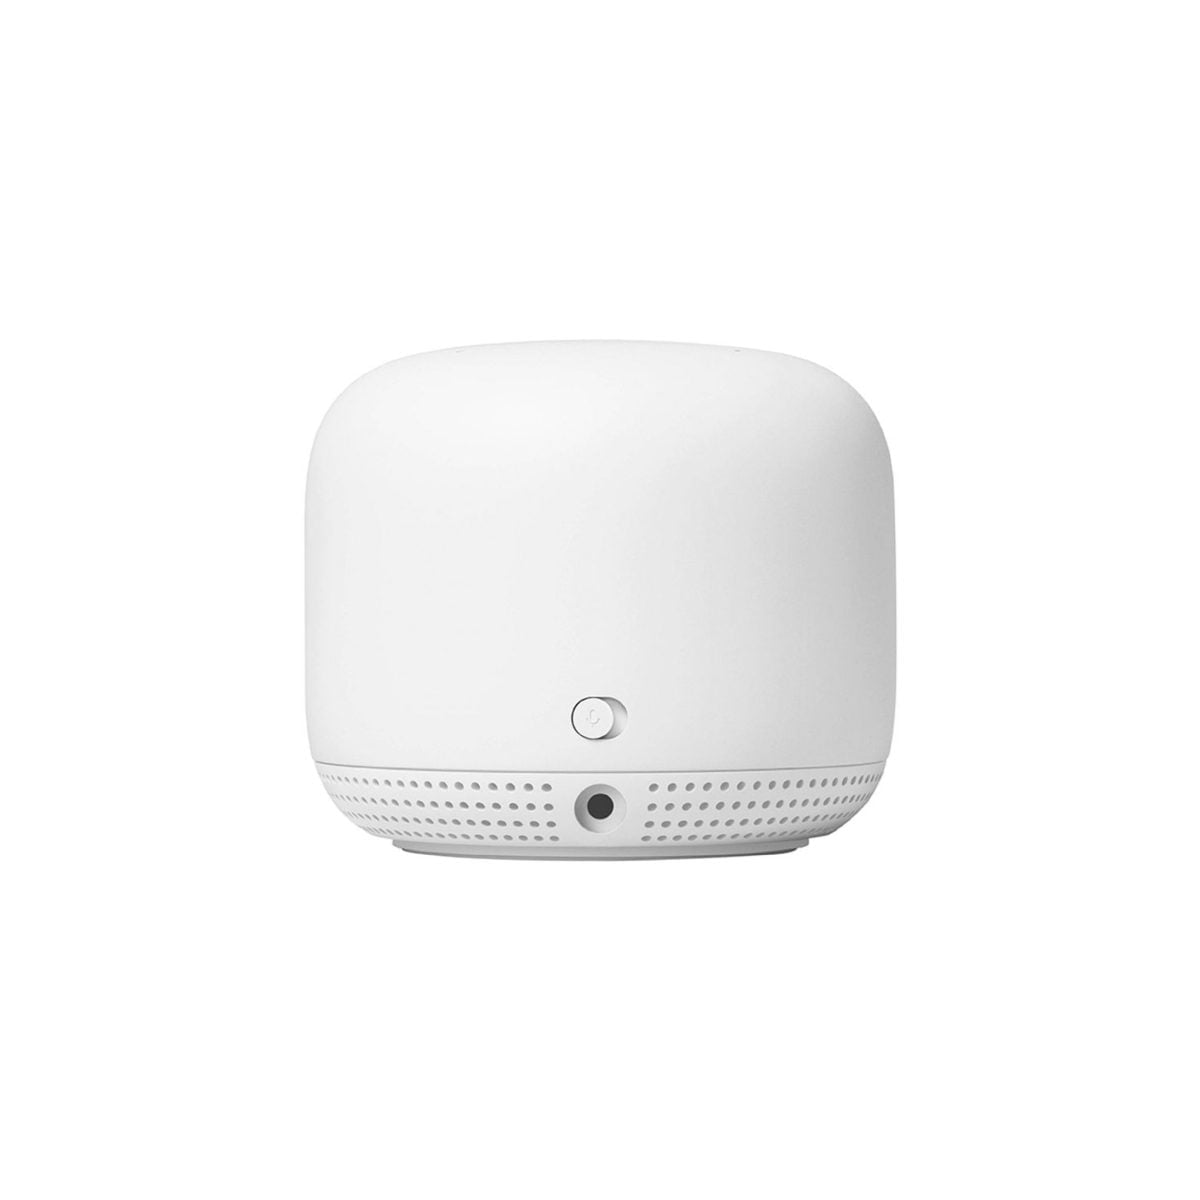 Dsd2212 06 Scaled Google Https://Youtu.be/Wsduj9Sm78K Google Nest Wifi Router And 2 Access Points (2020)